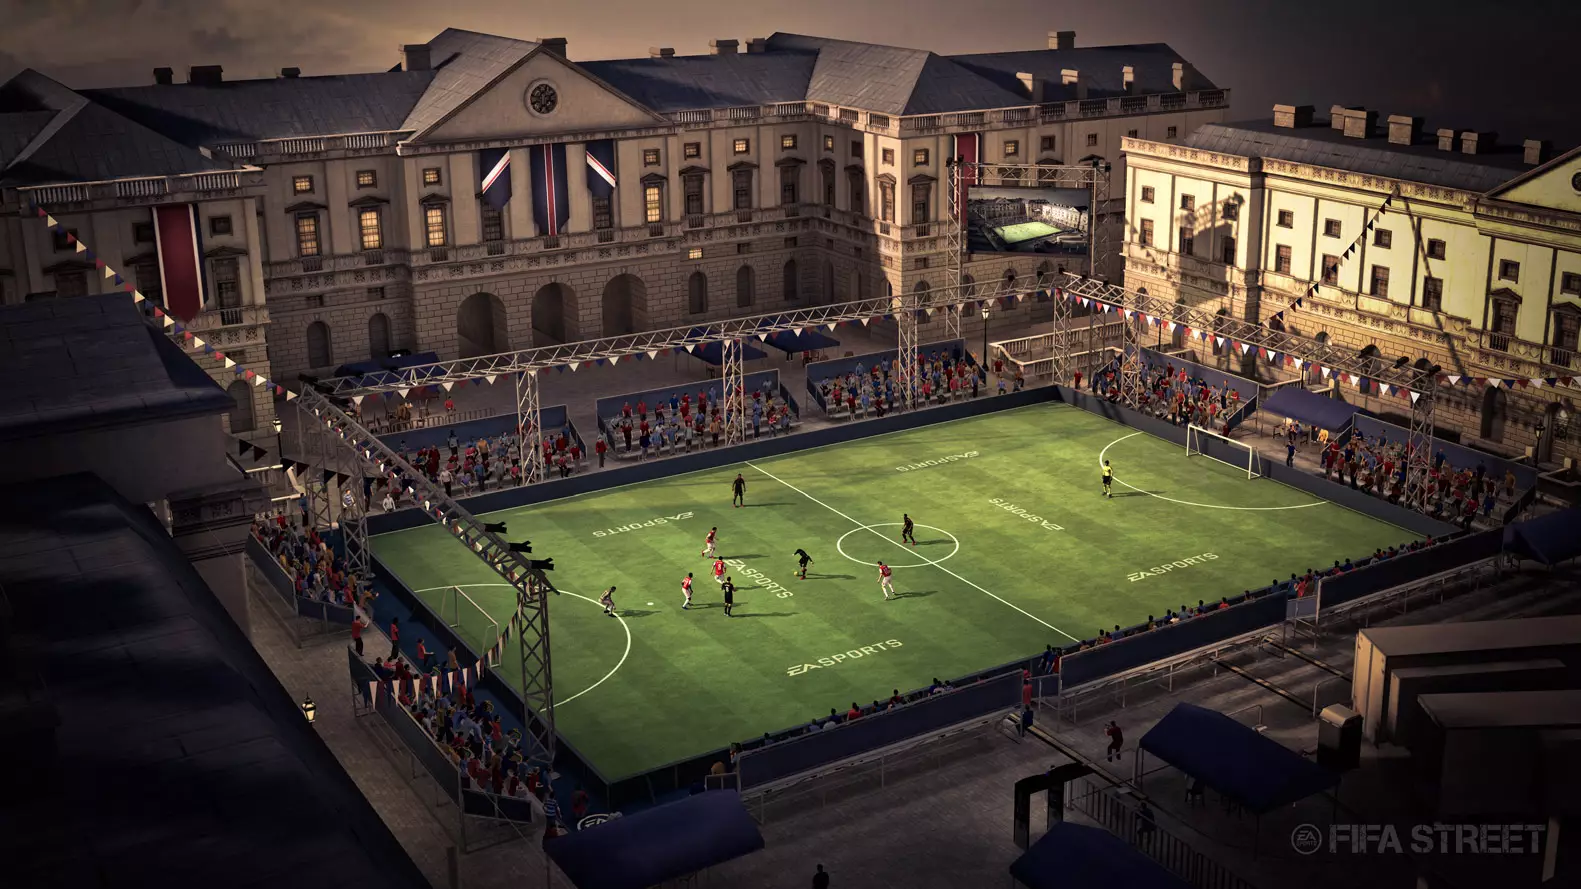 Leaked Footage Suggests FIFA Street Is Coming To FIFA 18